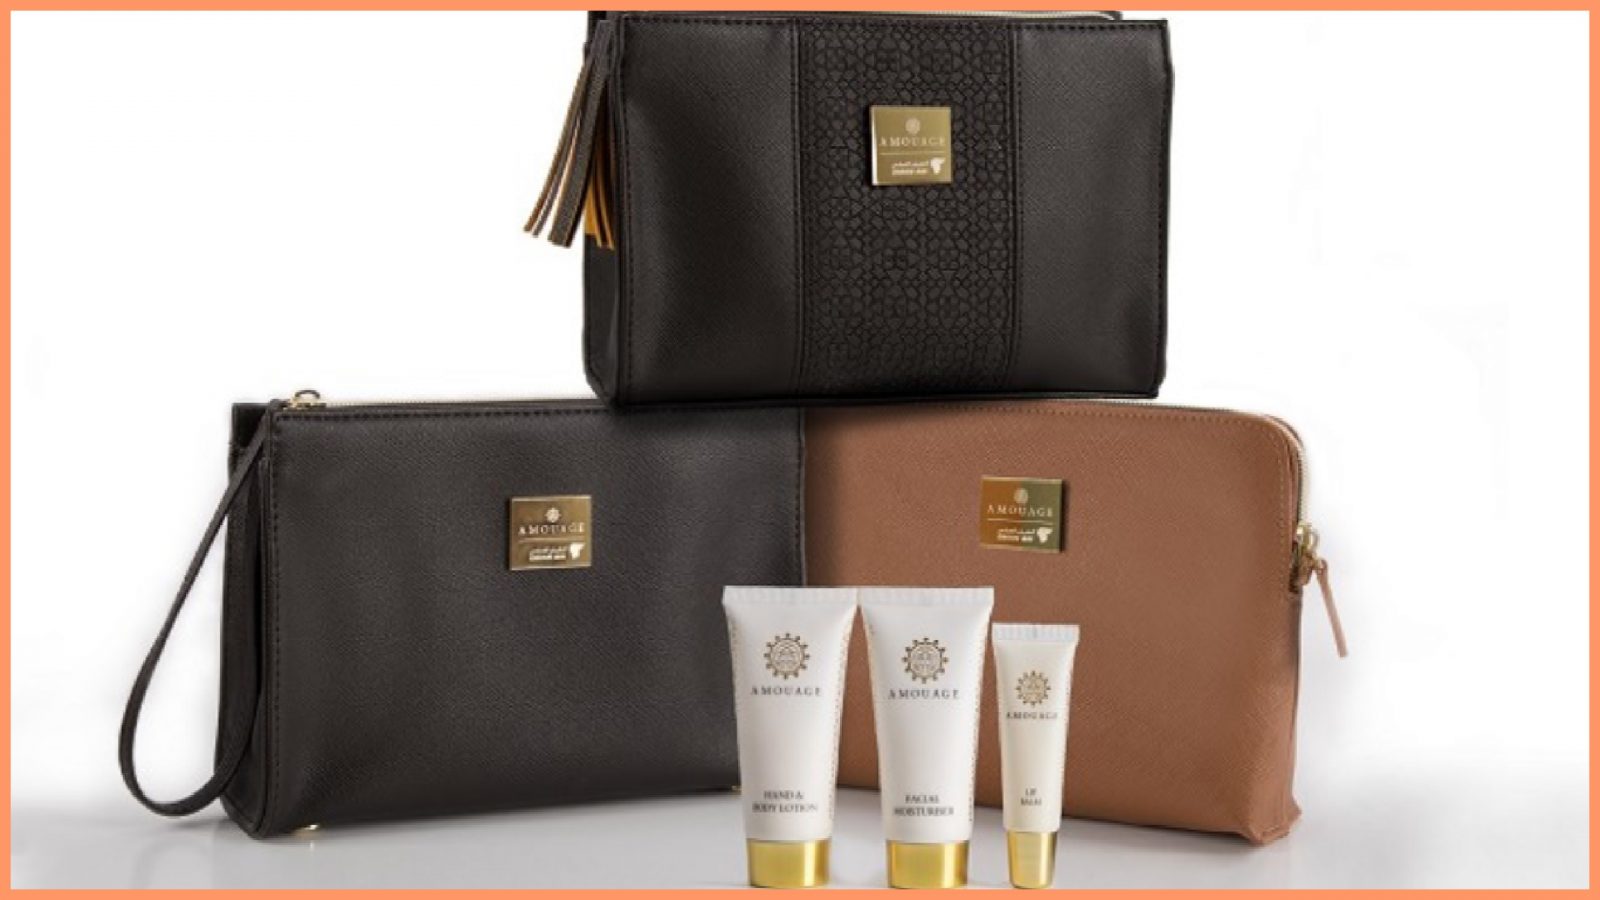 Is Oman Air Taking A Pop At Etihad With Its New Amenity Kits And Other Enhancements?